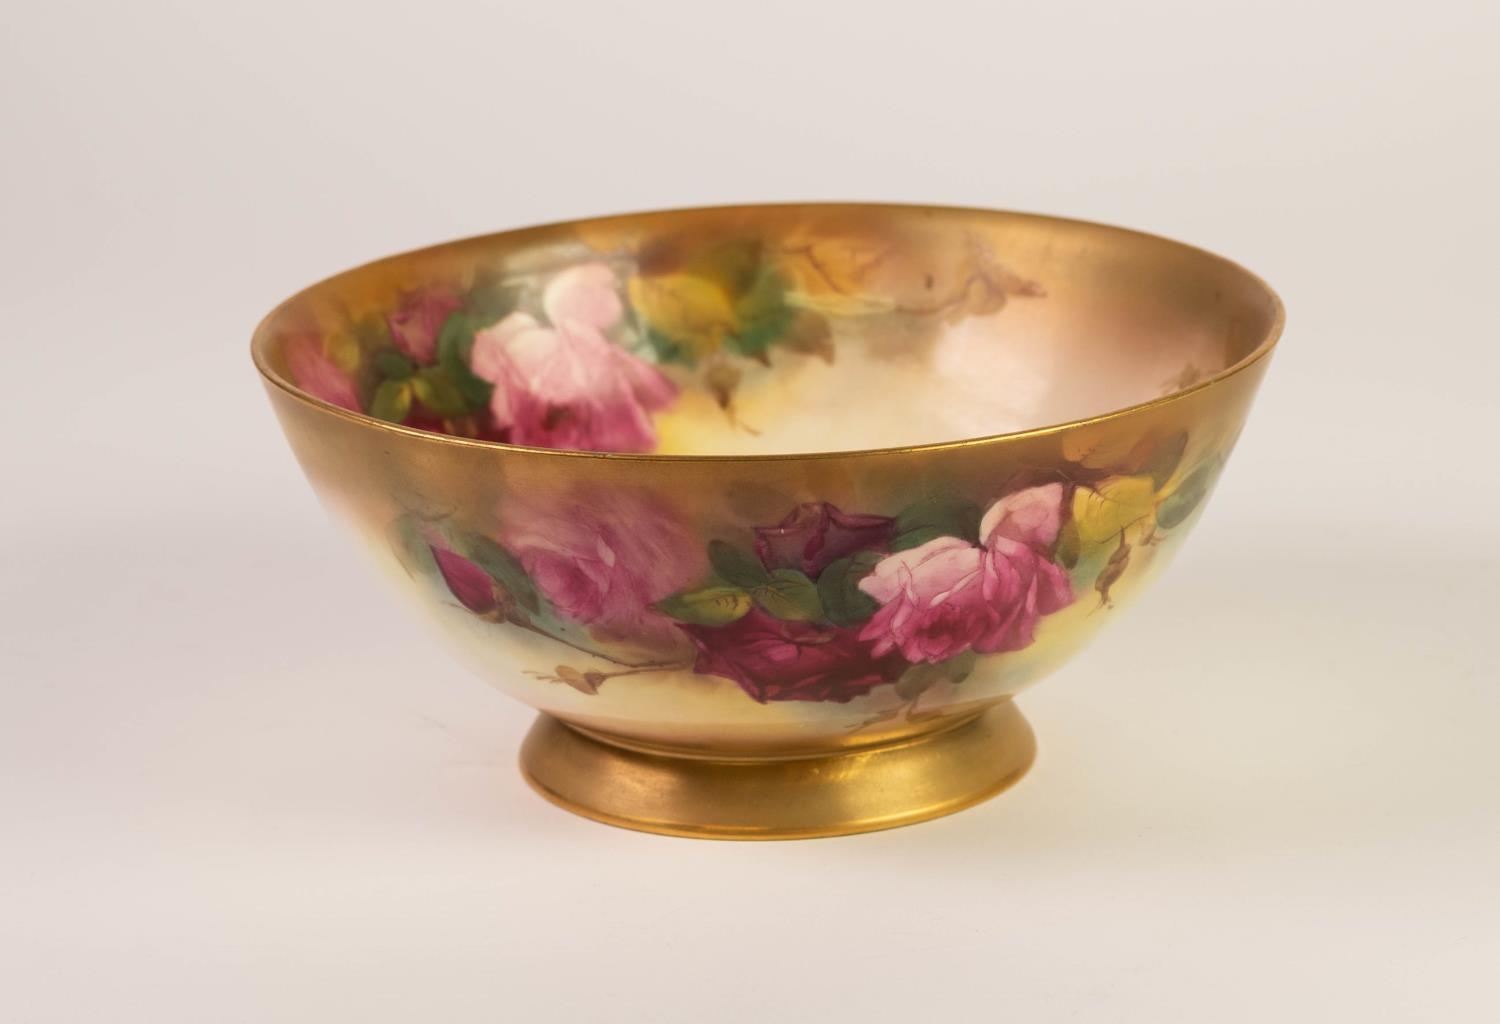 EARLY 20th CENTURY ROYAL WORCESTER PORCELAIN BOWL, painted with roses, signed E Spilsbury, printed - Image 3 of 4